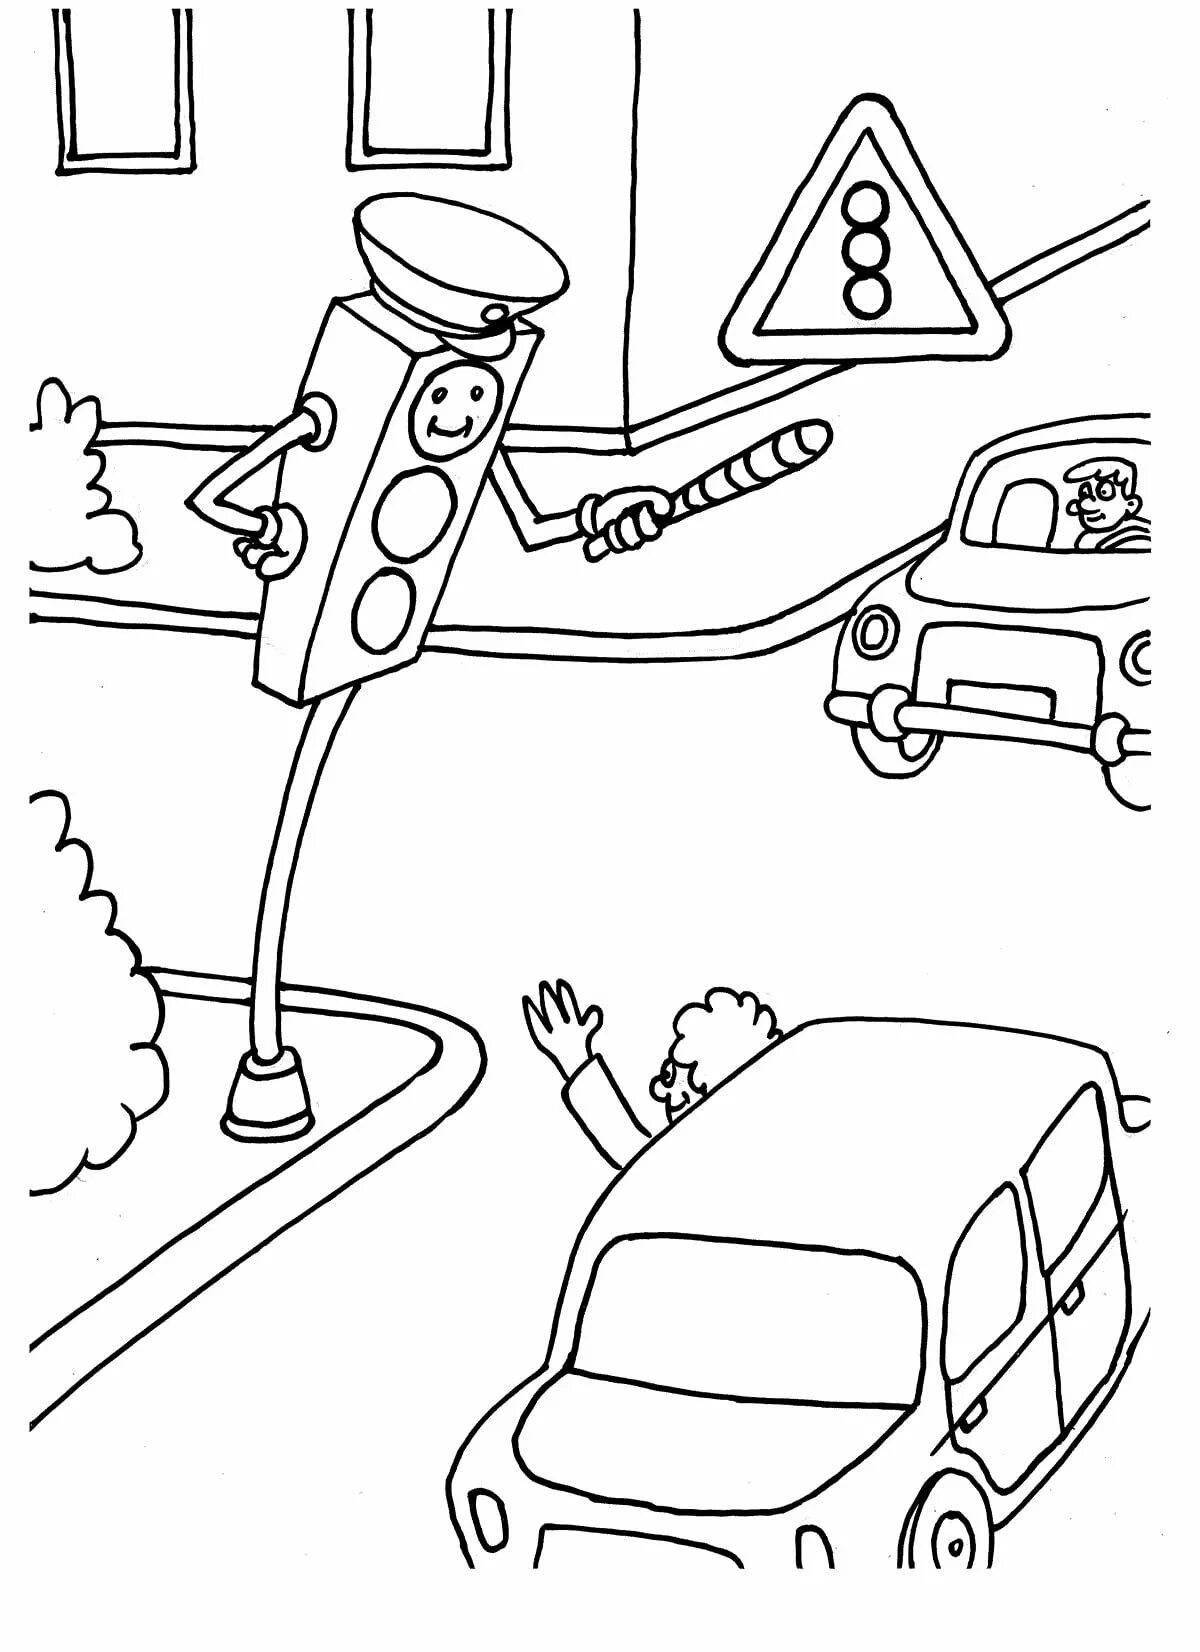 Stimulating rules of the road coloring book for schoolchildren